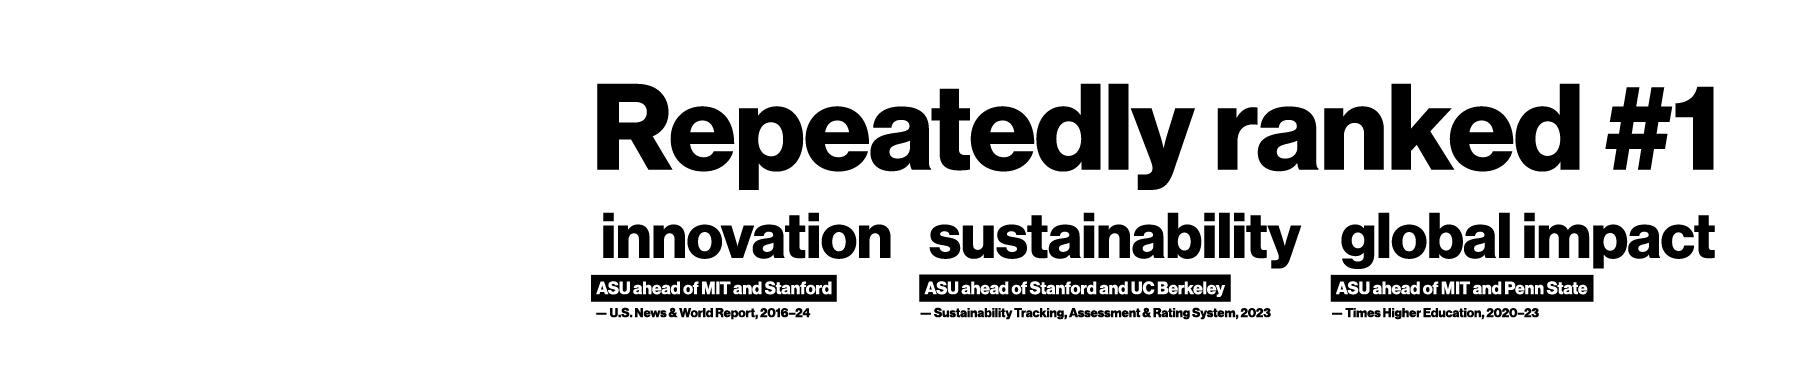 Number one in the U.S. for innovation. ASU ahead of MIT and Stanford . - U.S. News and World Report, 6 years, 2016-2021